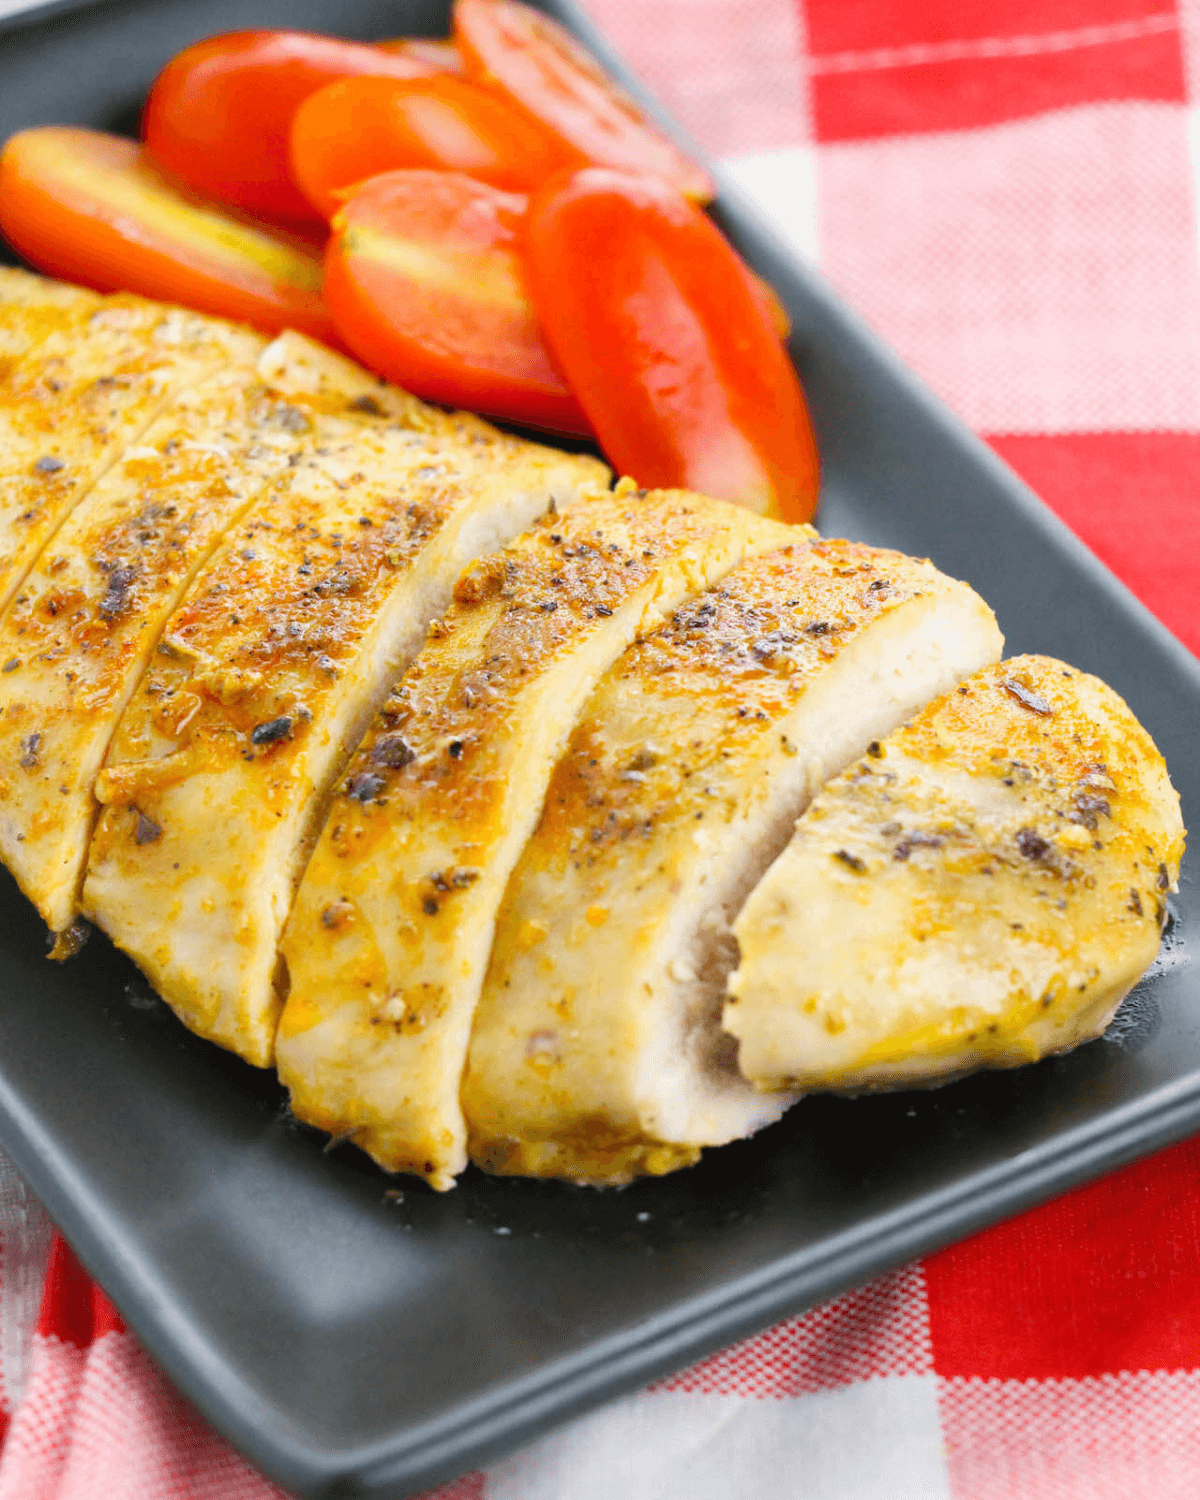 How to Make Chicken Cutlets from Chicken Breasts